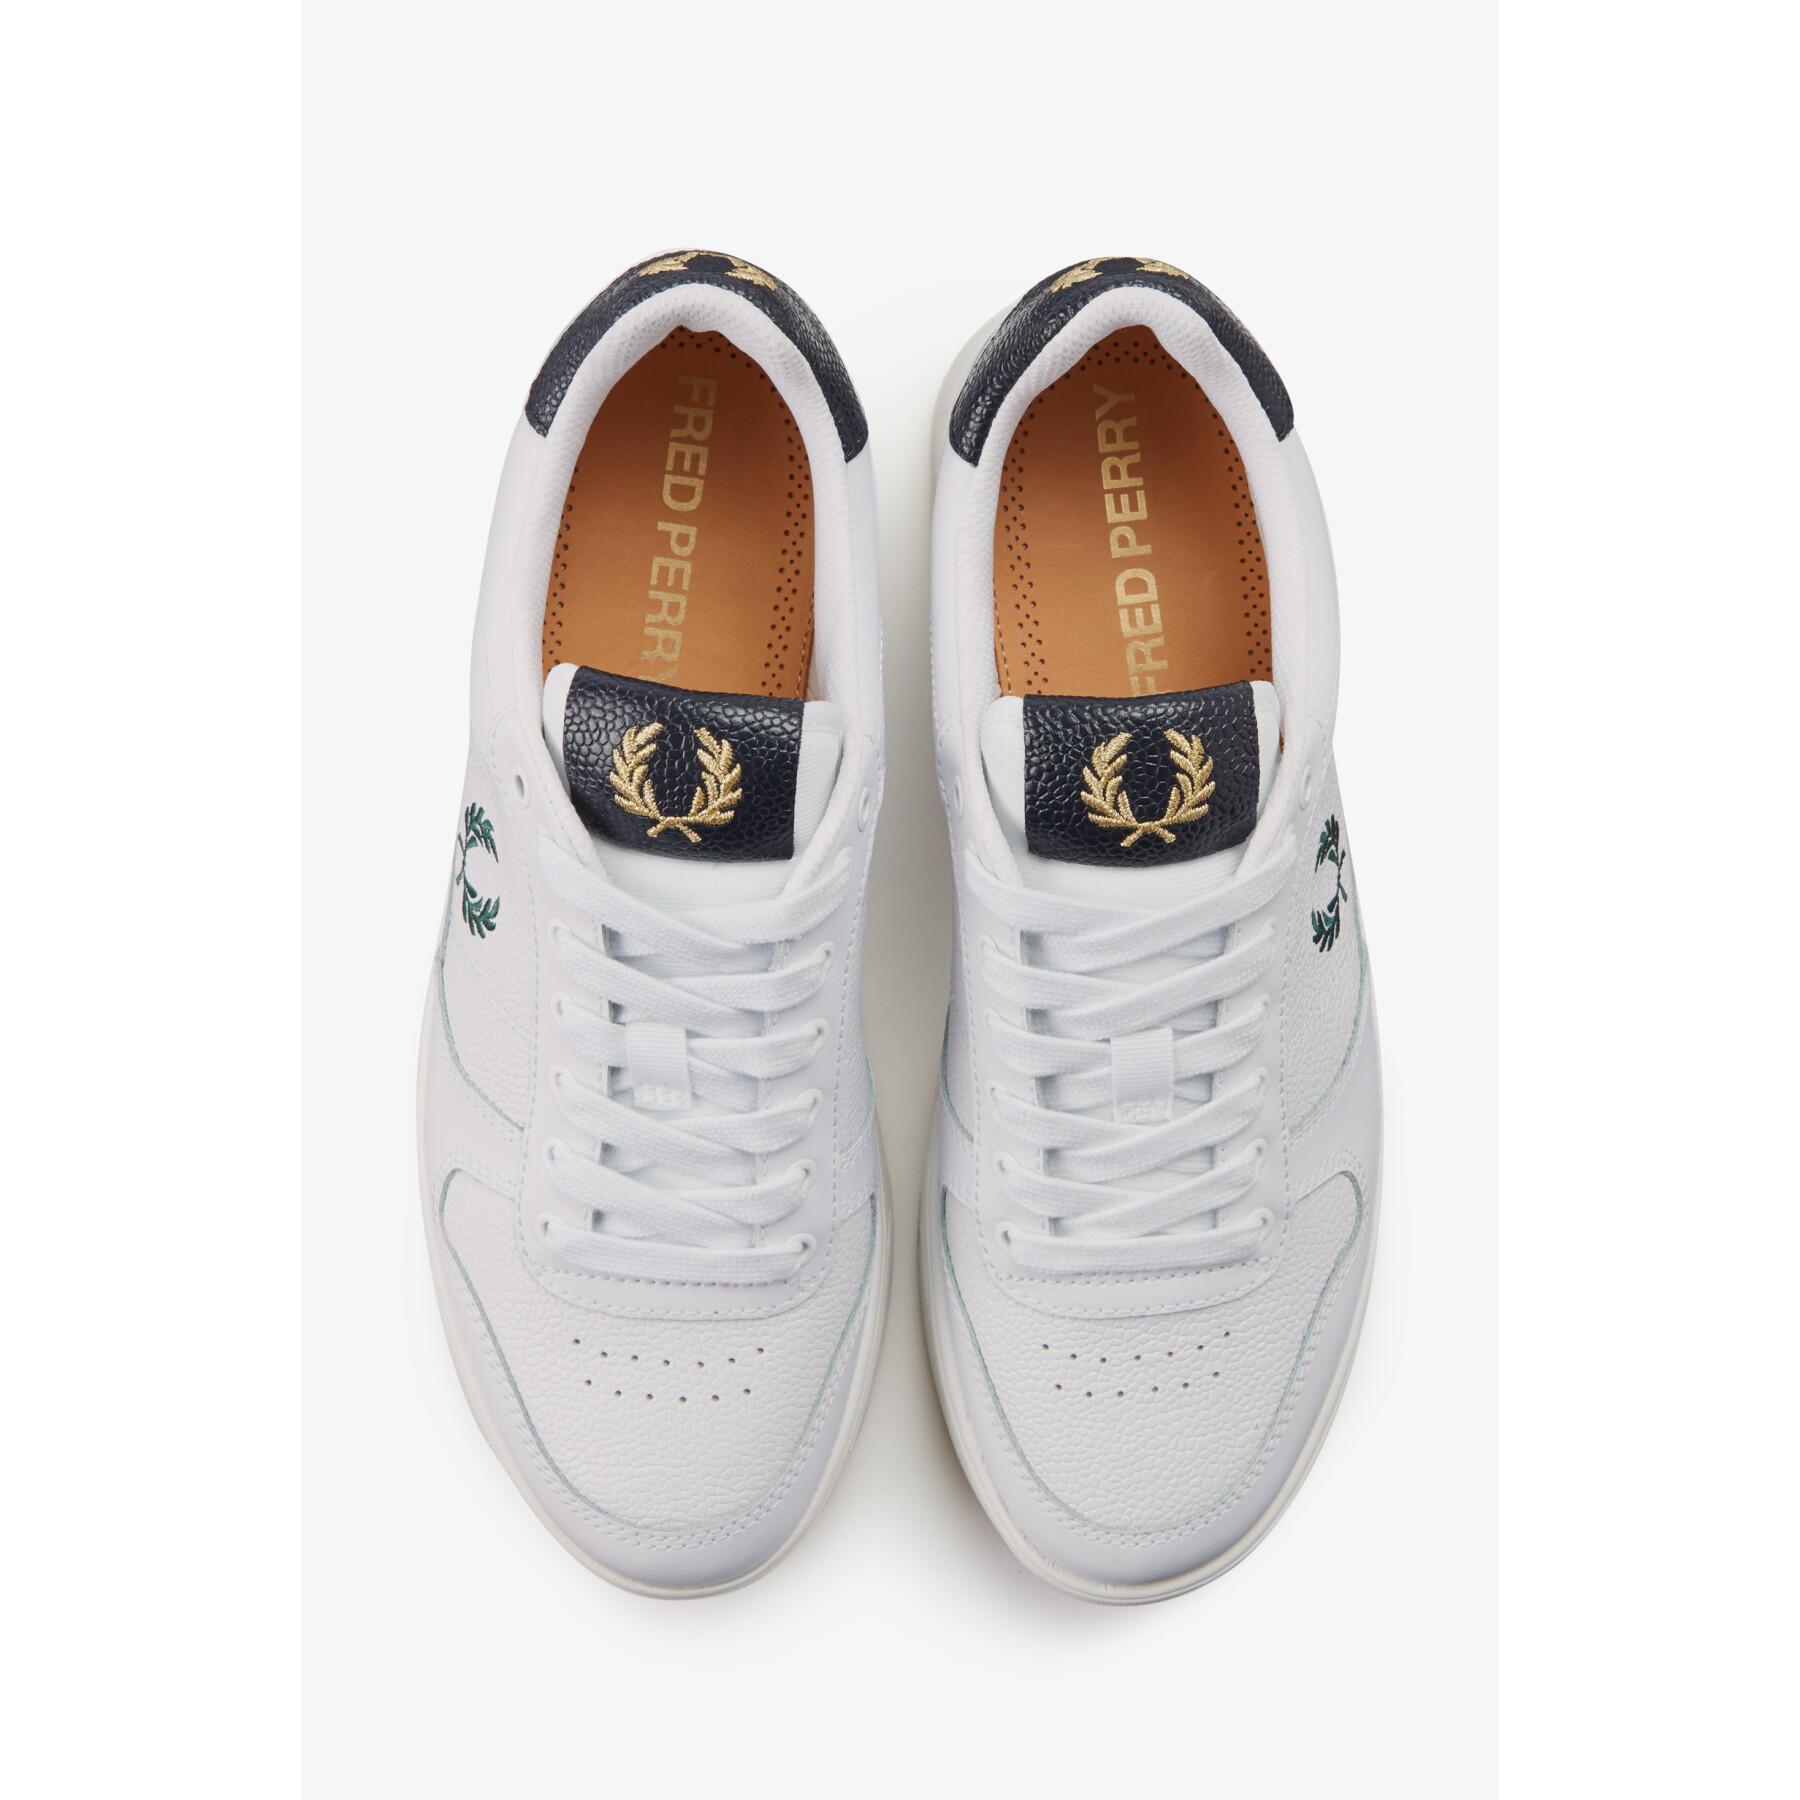 Sneakers Fred Perry B300 Scotchgrain Leather